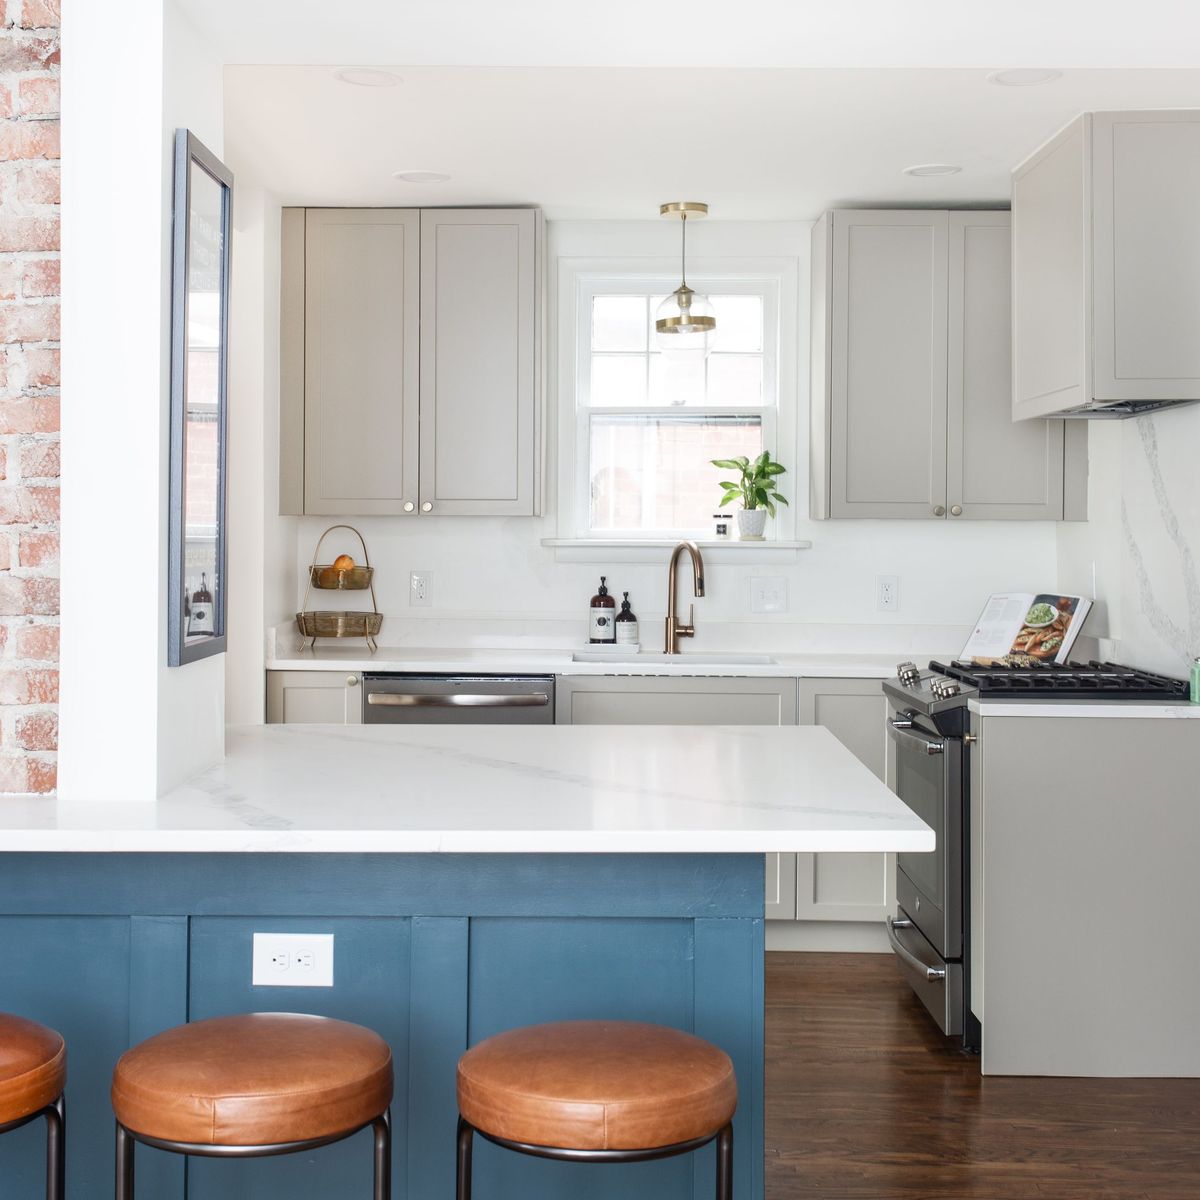 Cabinet Trends For 2020 Kitchen Cabinet Colors Of 2020